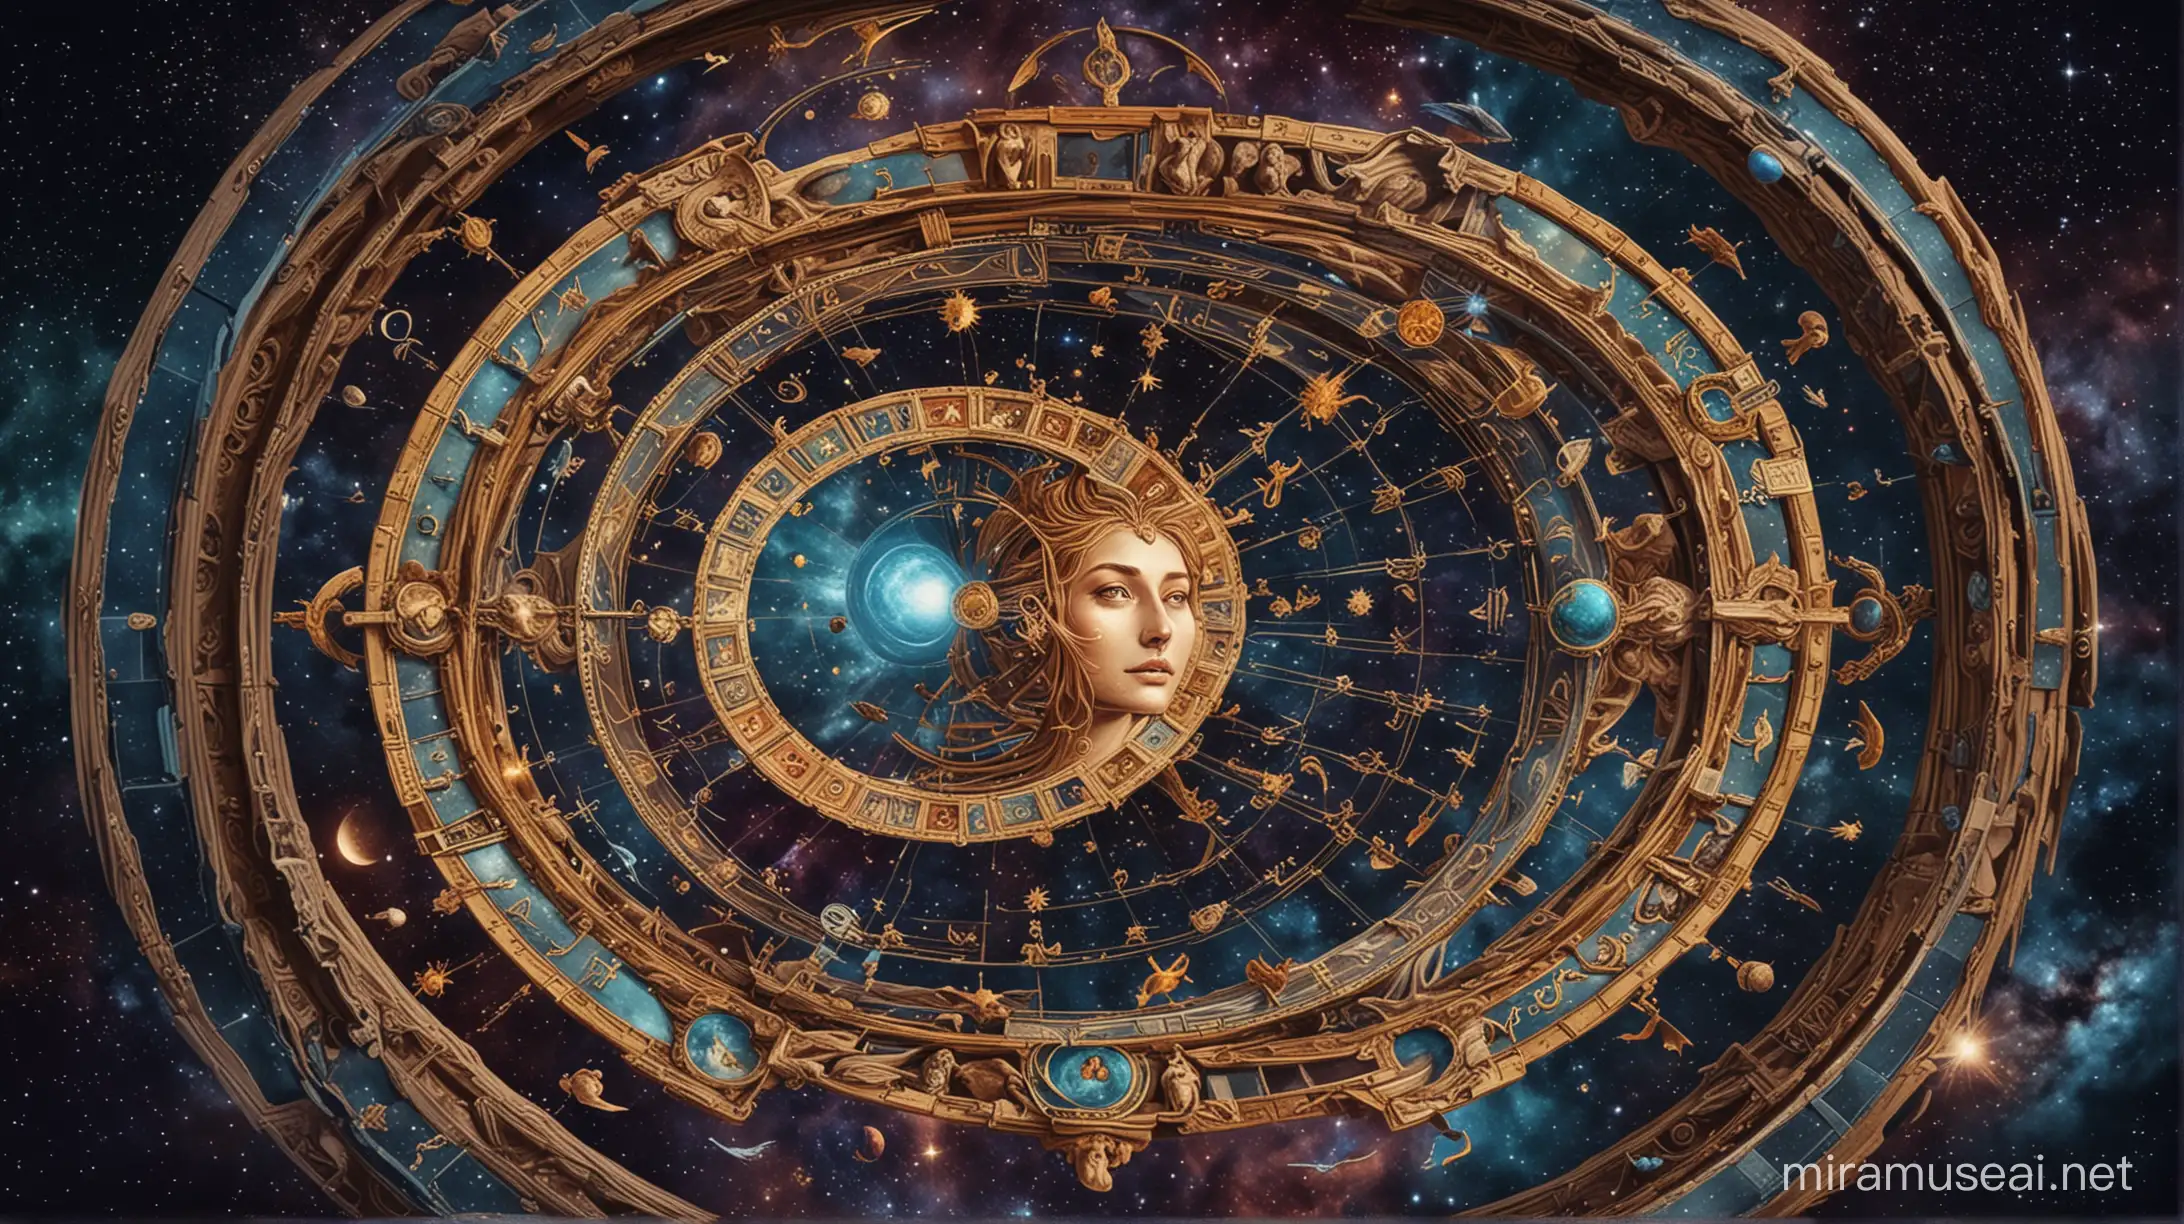 Cosmic Zodiac Circle with Ethereal Human Faces Afloat in a Fantasy StarFilled Sky